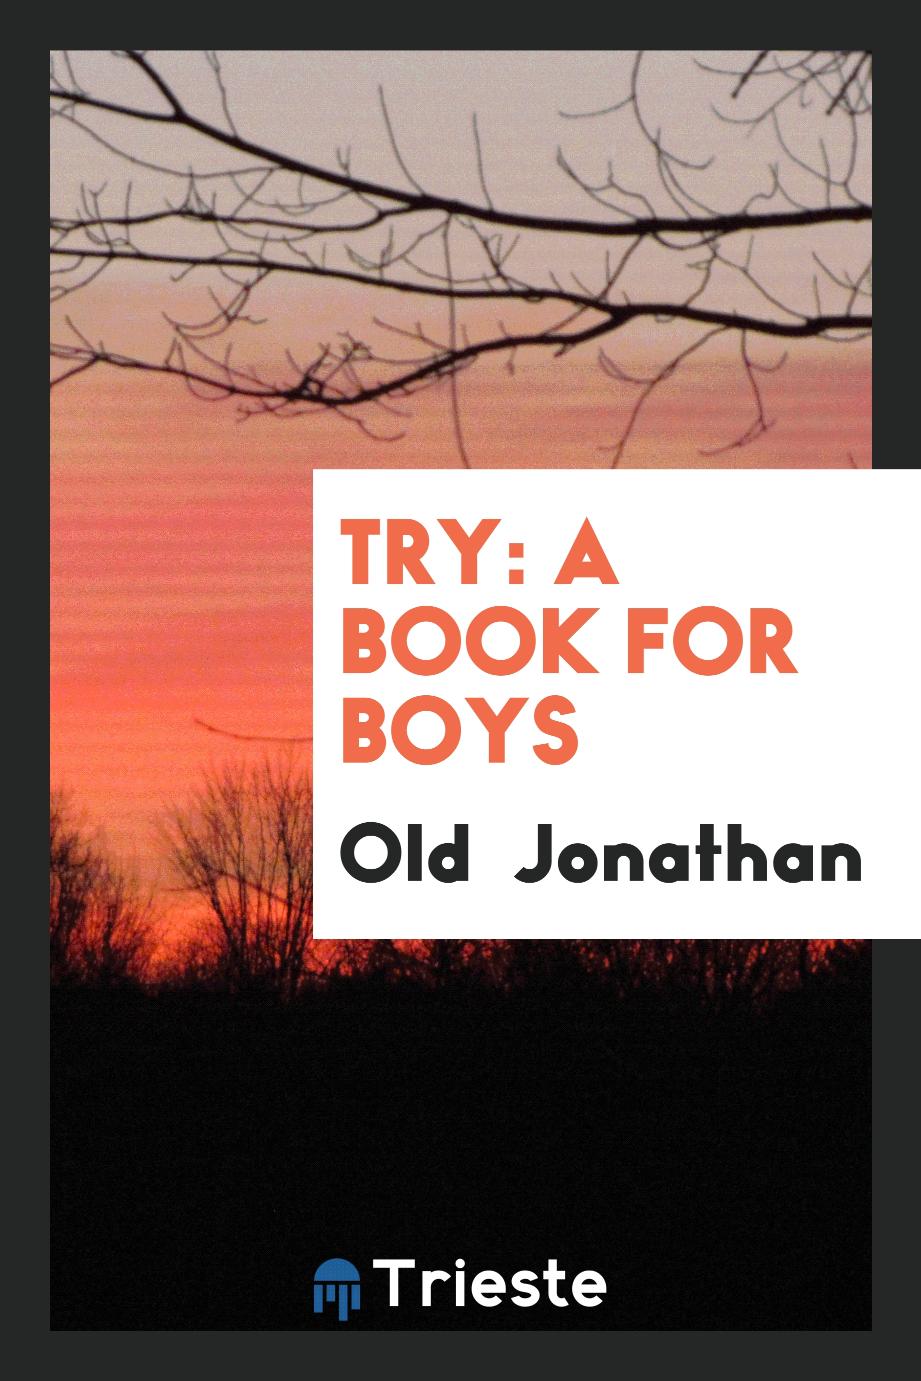 Try: A Book for Boys